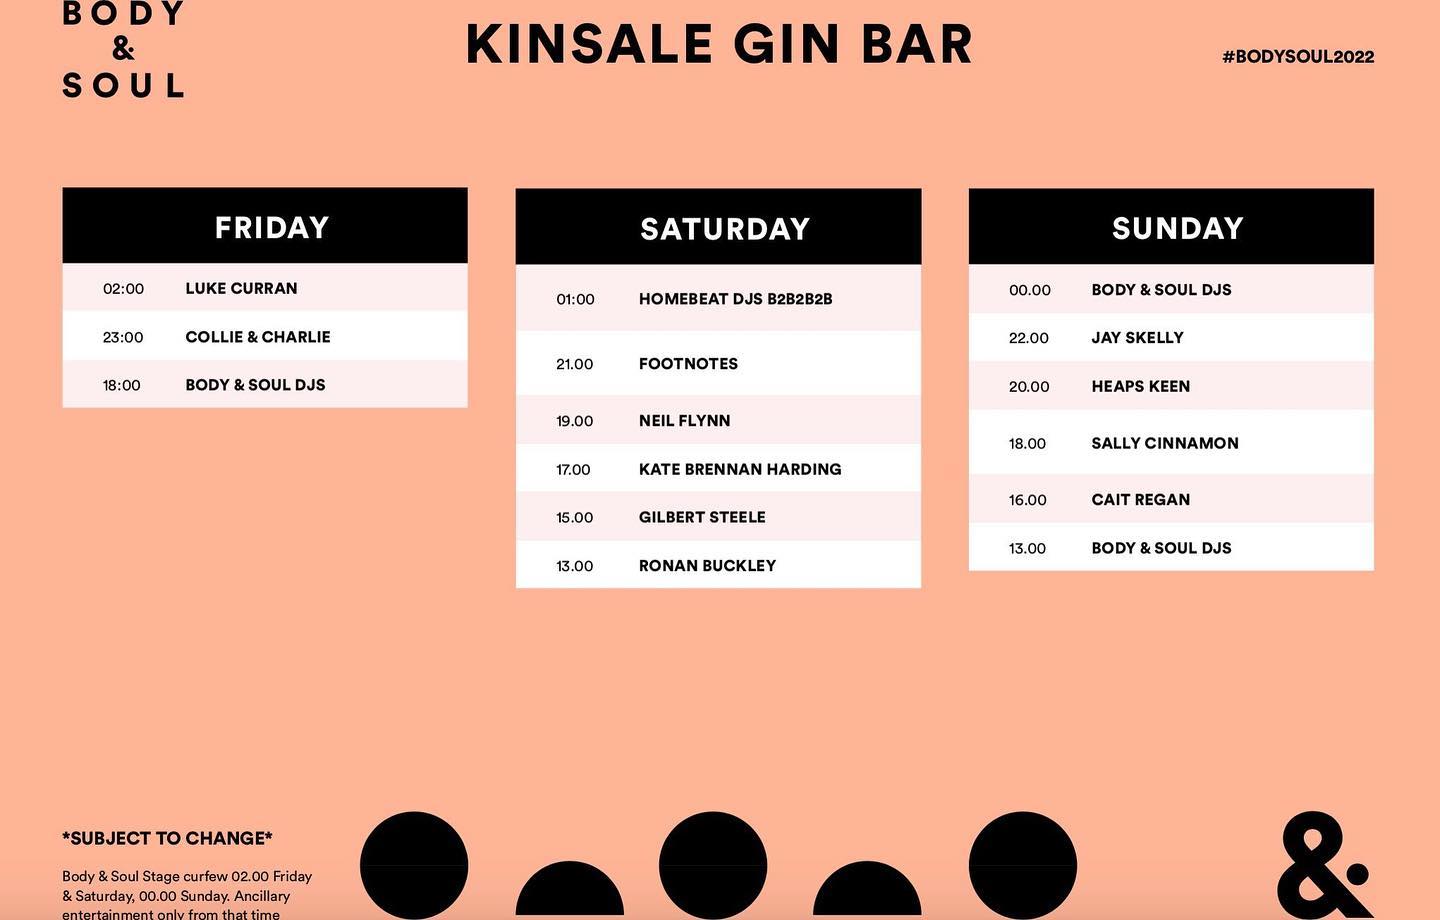 😎 Are you heading to @bodyandsoulirl festival this weekend, swing by our Kinsale Gin Bar to listen to some fantastic live artists and DJs and of course  sample our multi-award winning Kinsale Gin 🍸